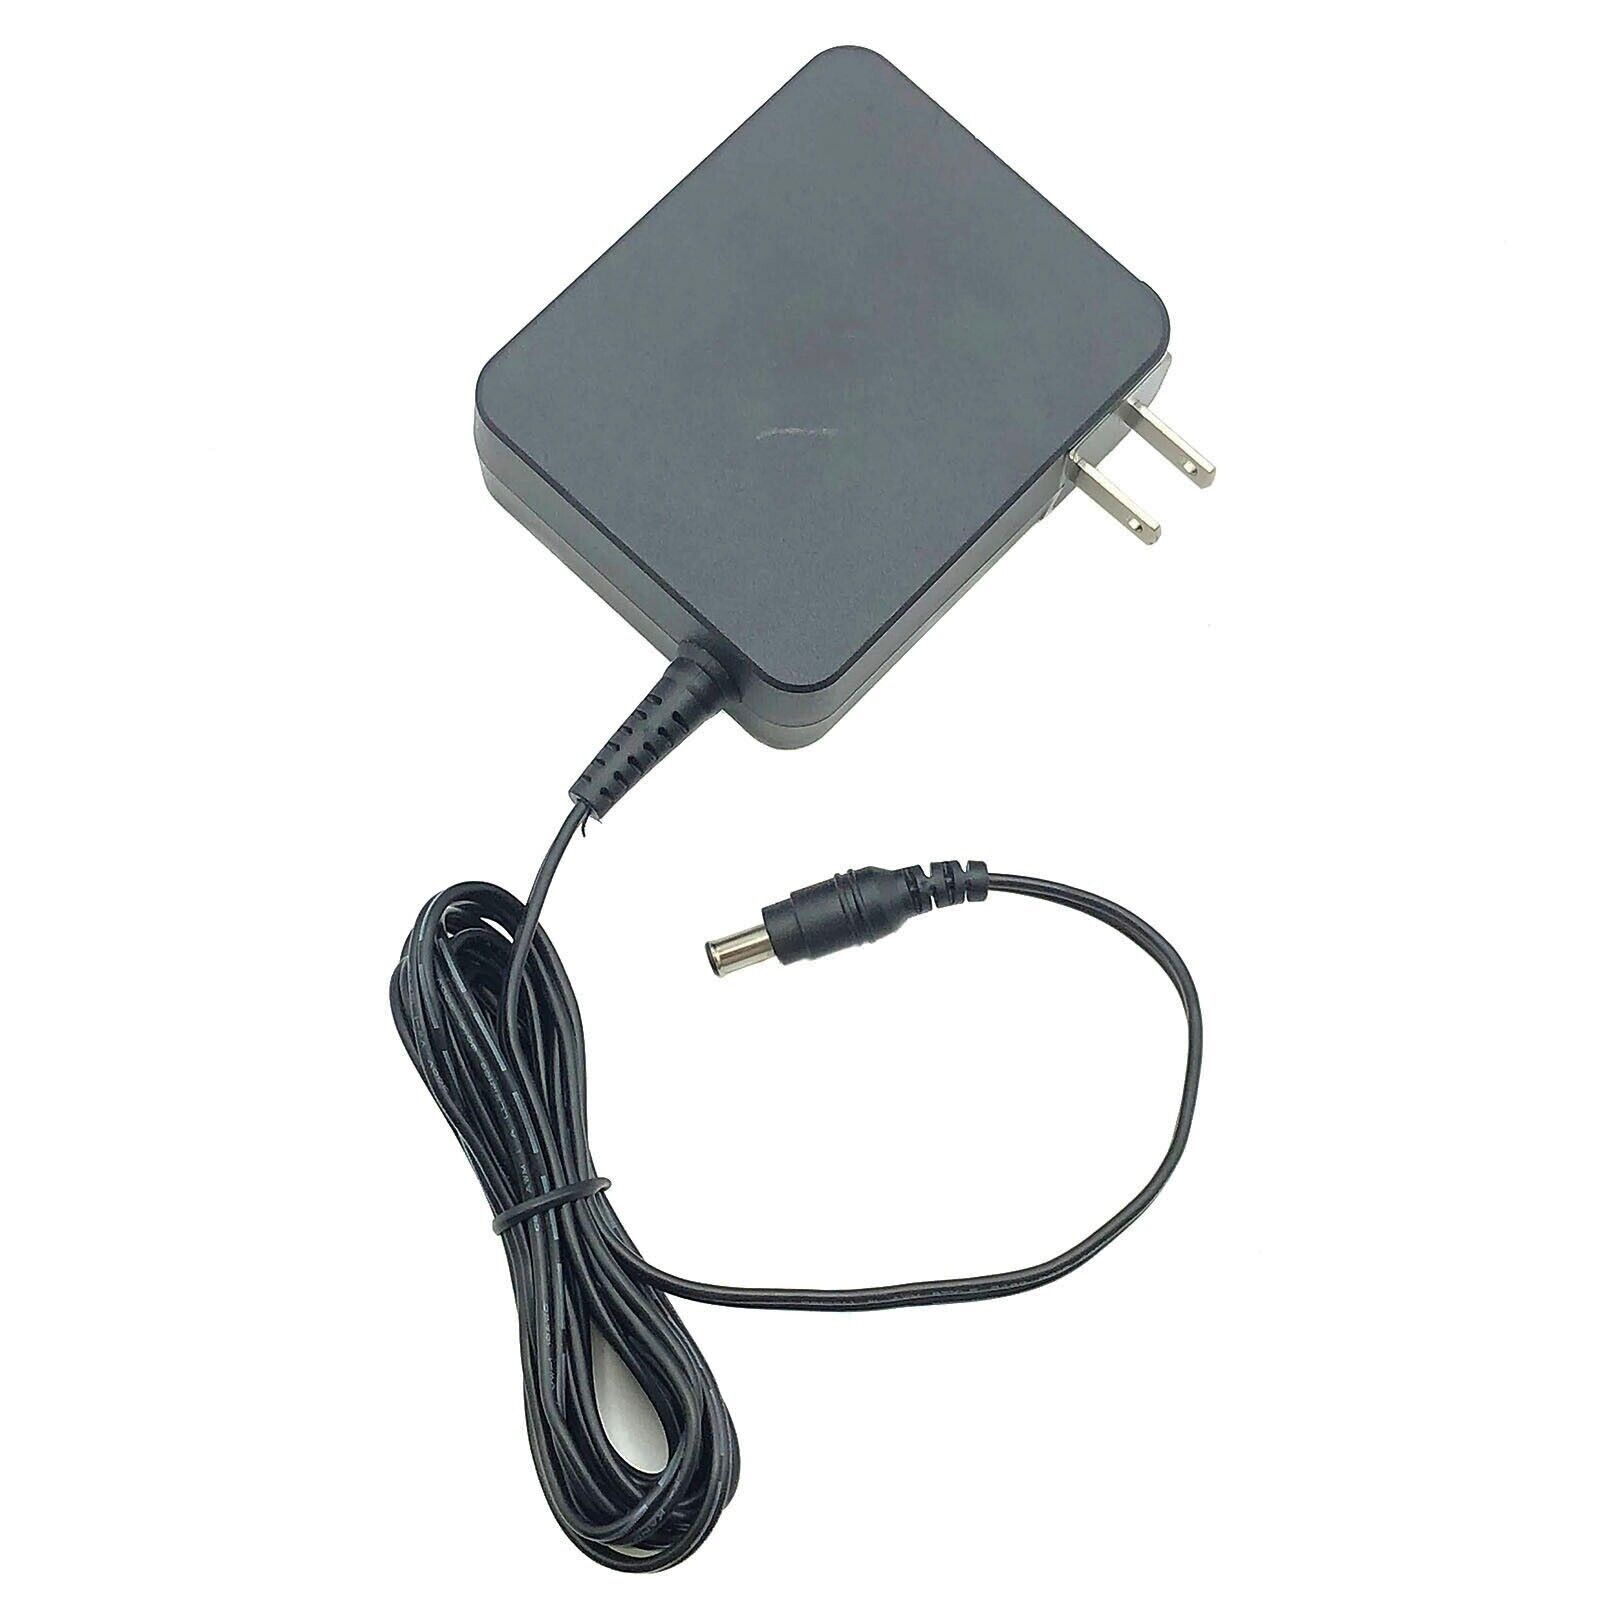 Genuine AC Power Adapter 19V for Netgear Nighthawk C7500 WiFi Cable Modem Router